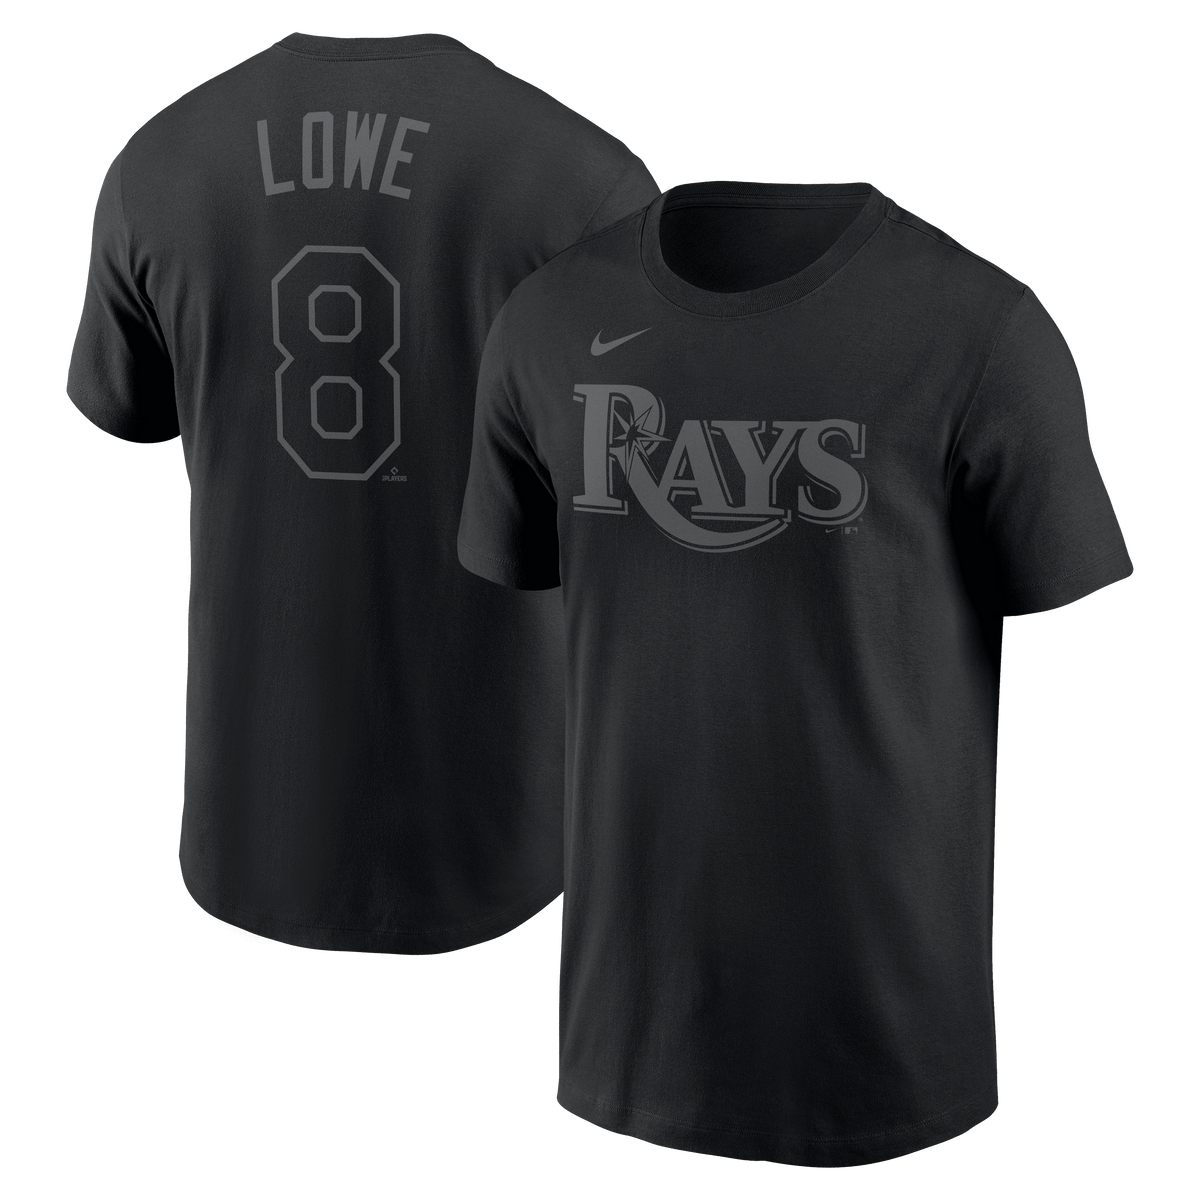 RAYS BLACKOUT BRANDON LOWE NAME AND NUMBER T-SHIRT – The Bay Republic